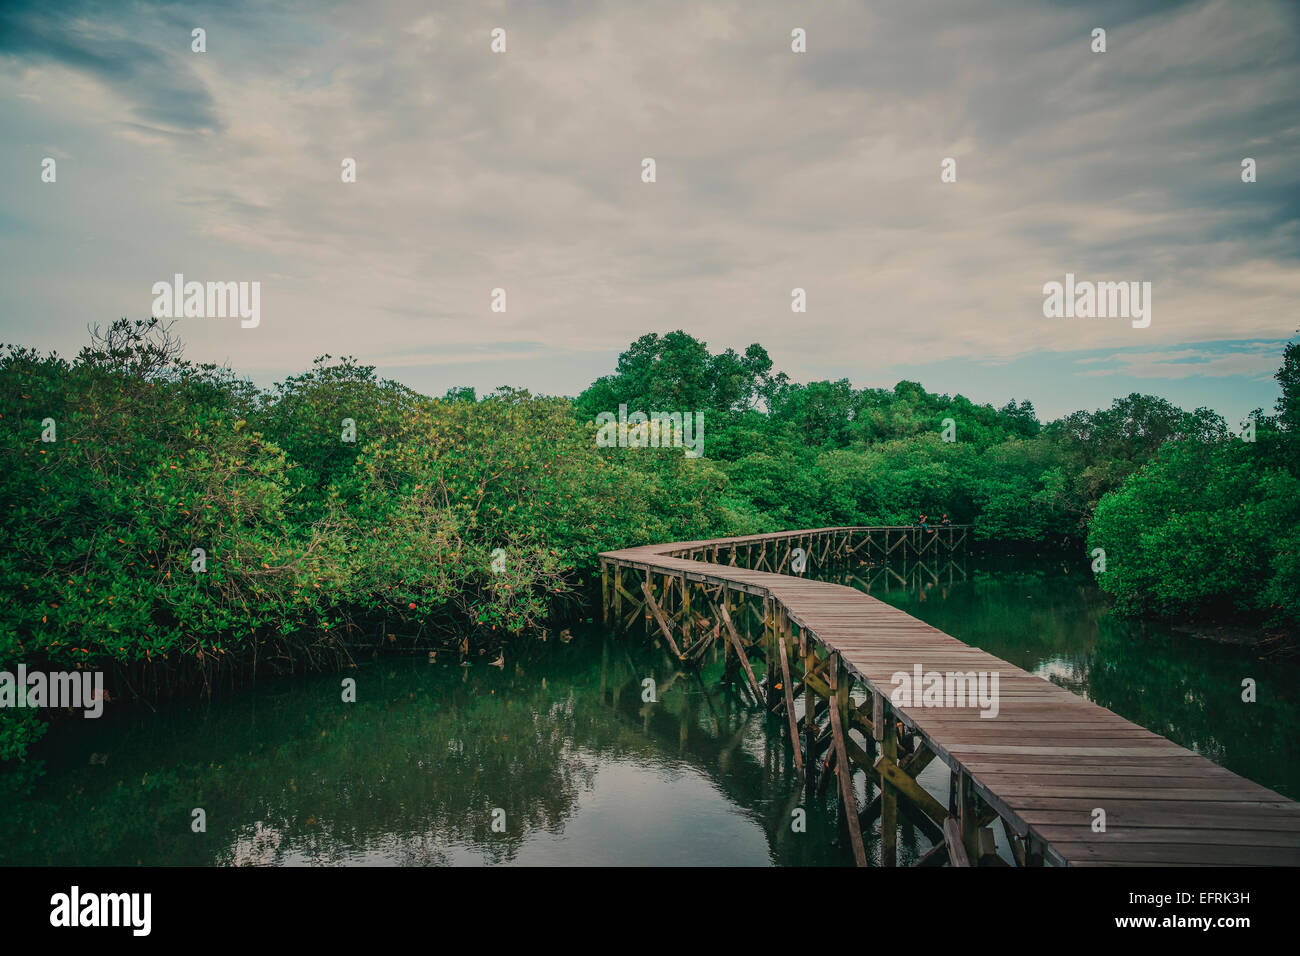 Mangrove forest in Bali, Indonesia Stock Photo